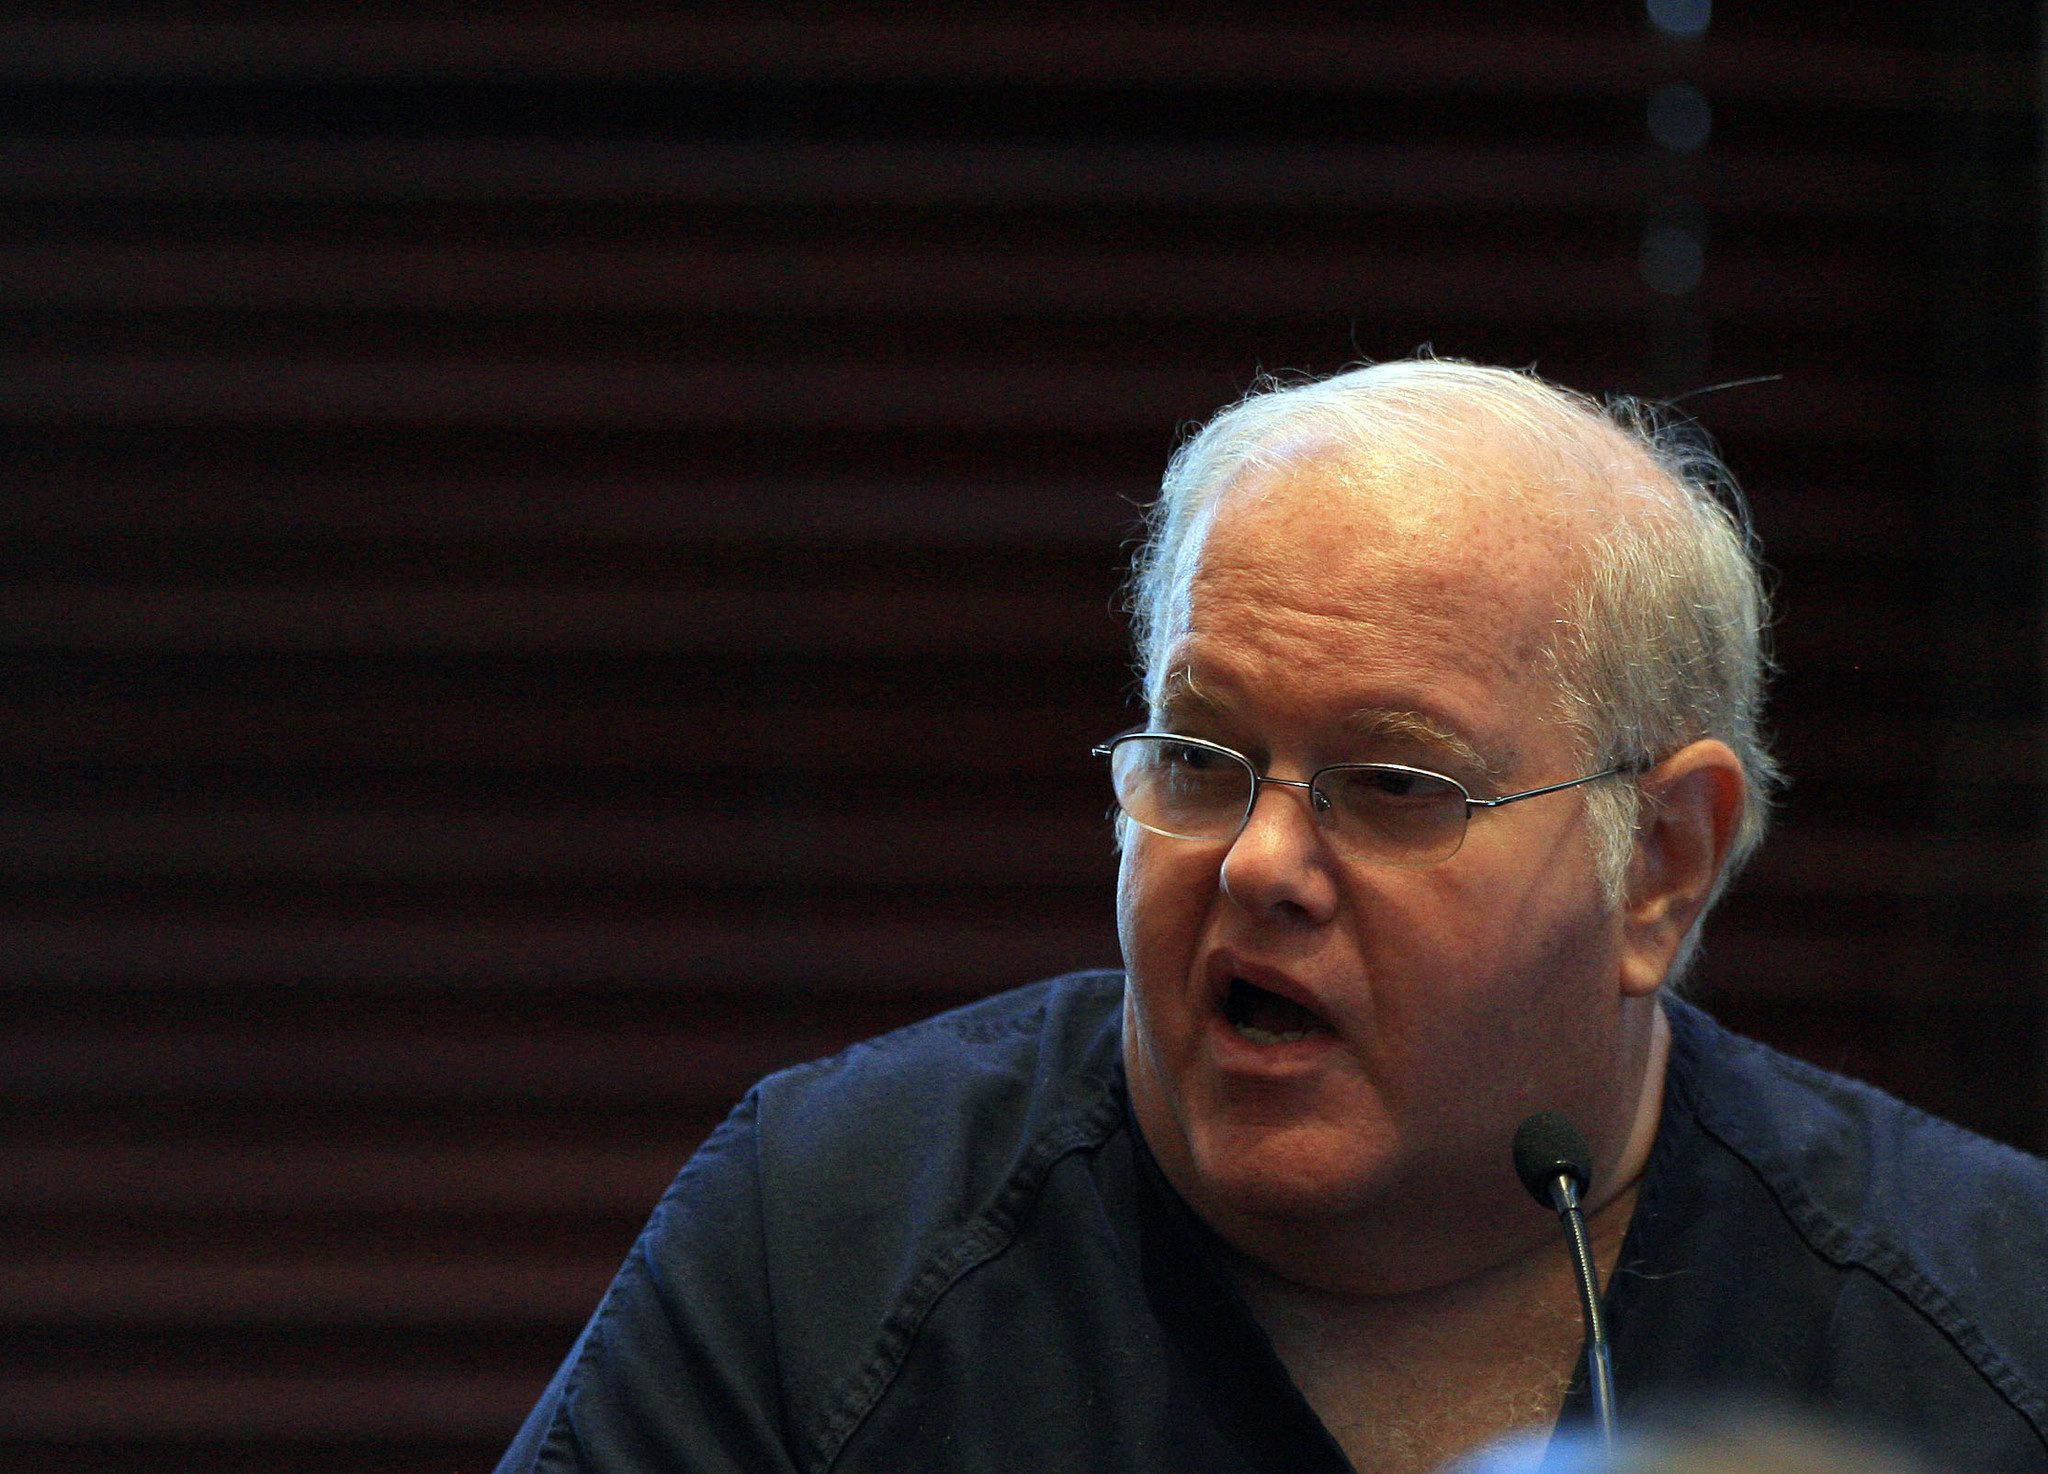 Lou Pearlman fraud victims will get first checks soon - Orlando Sentinel